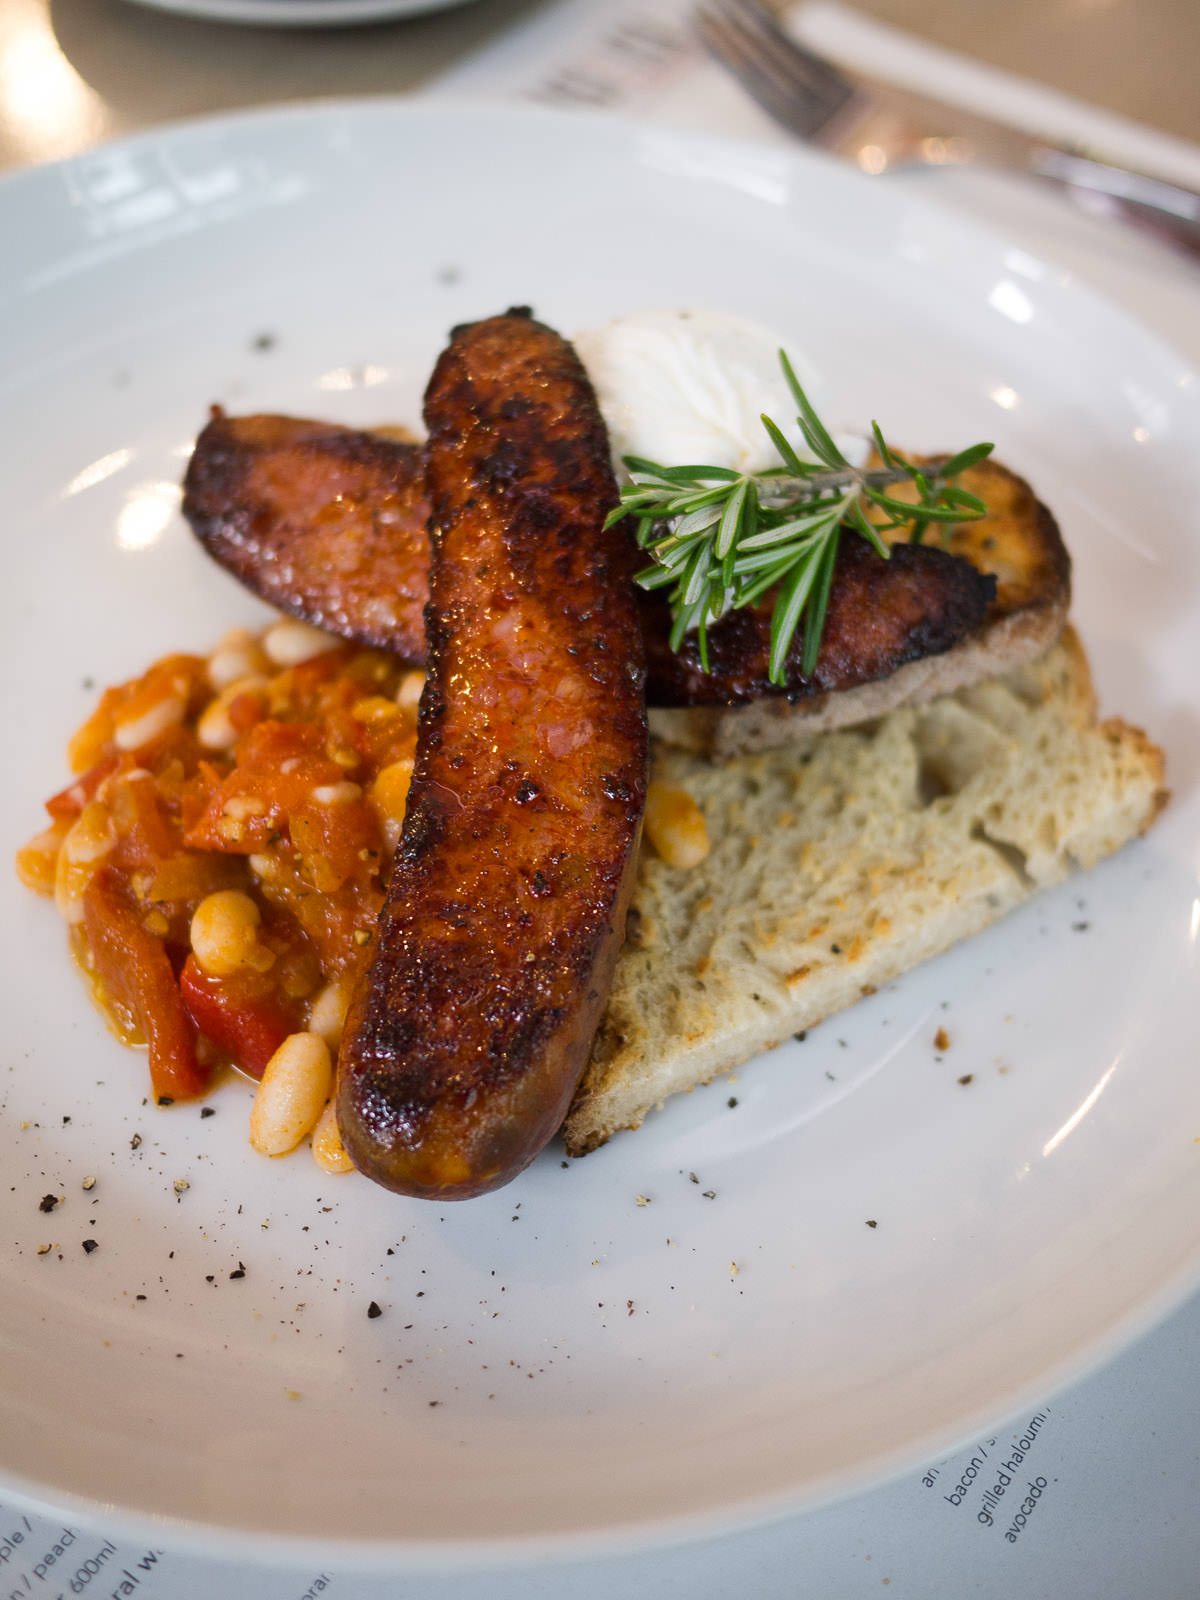 Grilled chorizo with cannellini beans, poached egg and sourdough (AU$17.50)